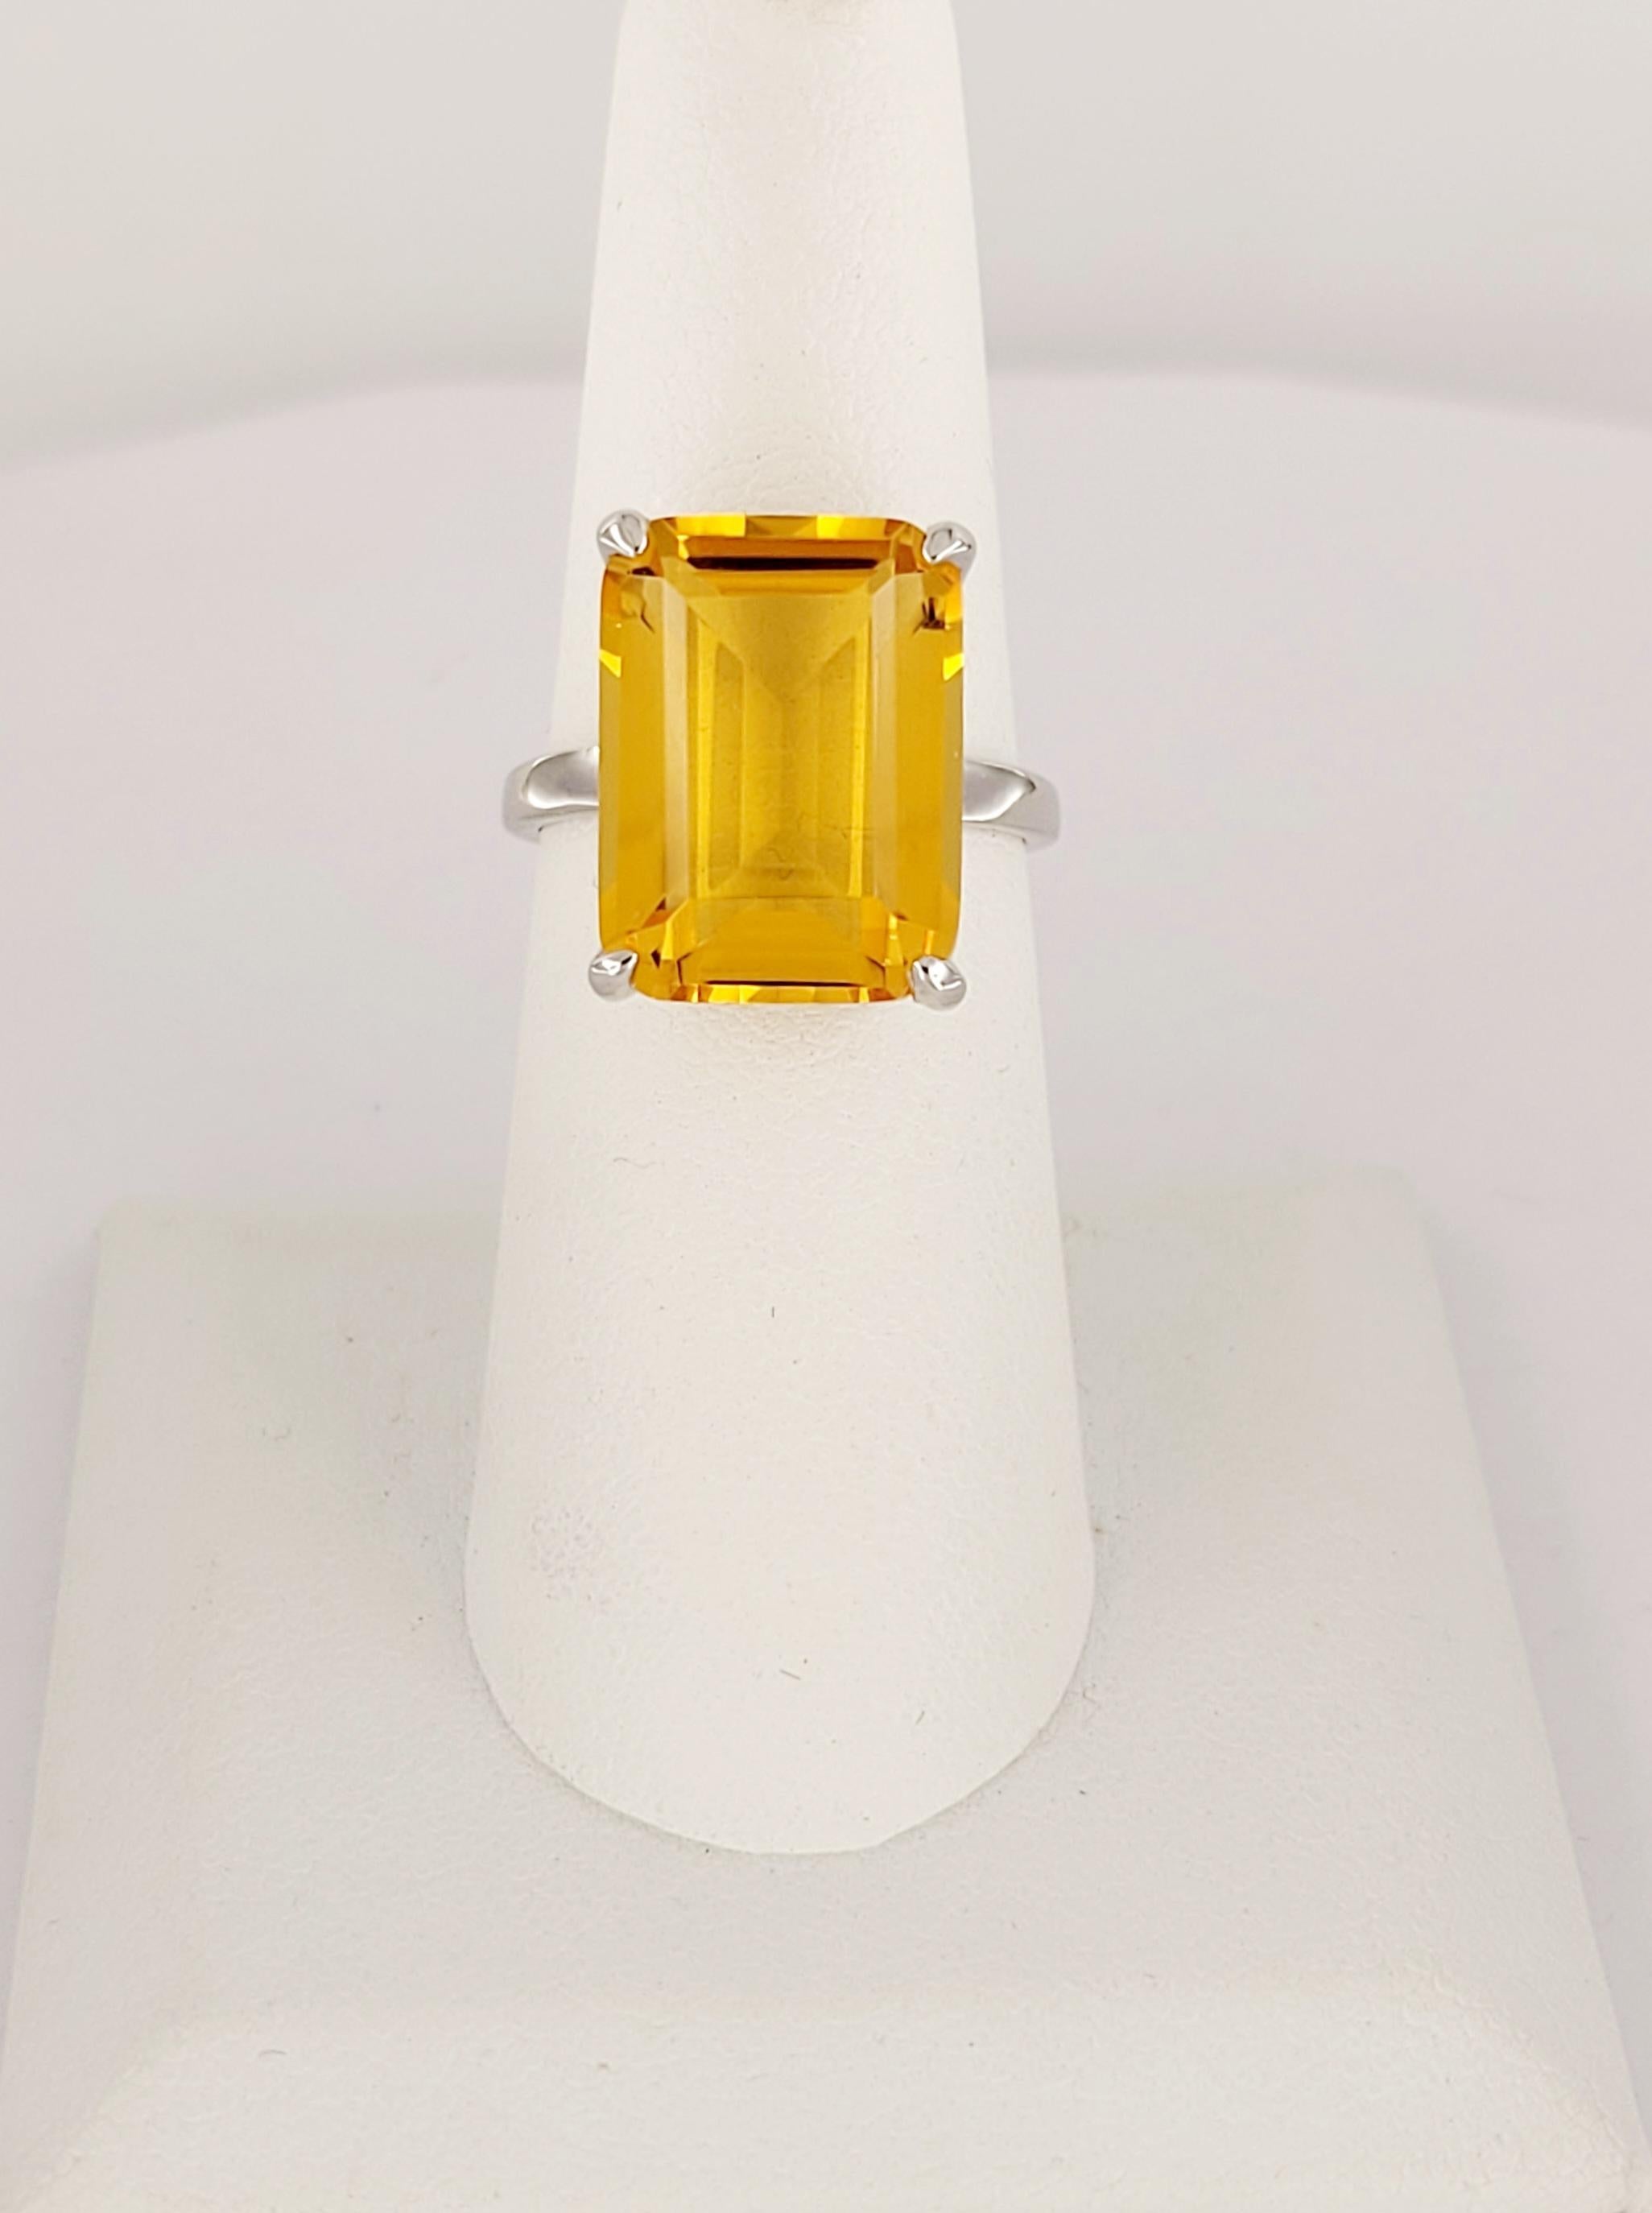 Tiffany& Co Sparklers Citrine Ring
Emerald Cut Citrine 
Stone Color Orange Citrine
Citrine Dimension 16 X 12mm
Ring Size 7
Ring Weight 4.9gr 
Hallmarks: Tiffany & Co.  AG925
Condition New, never worn 
Comes with Tiffany &Co Pouch